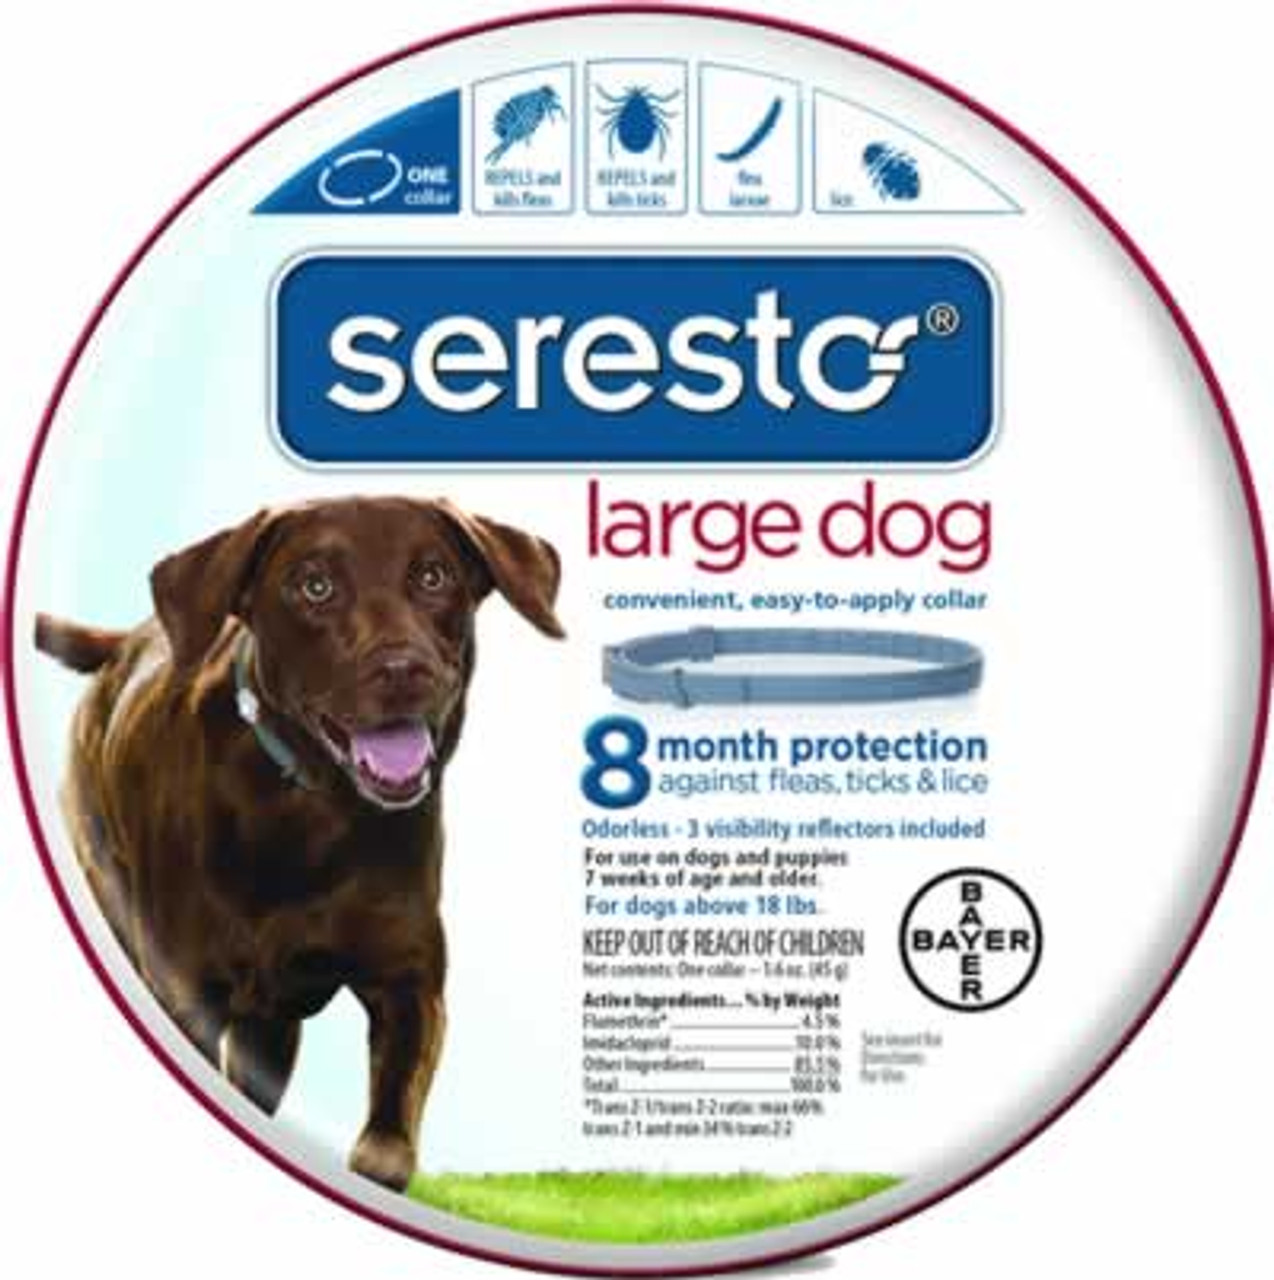 seresto-8-month-control-flea-and-tick-collar-for-large-dogs-over-18